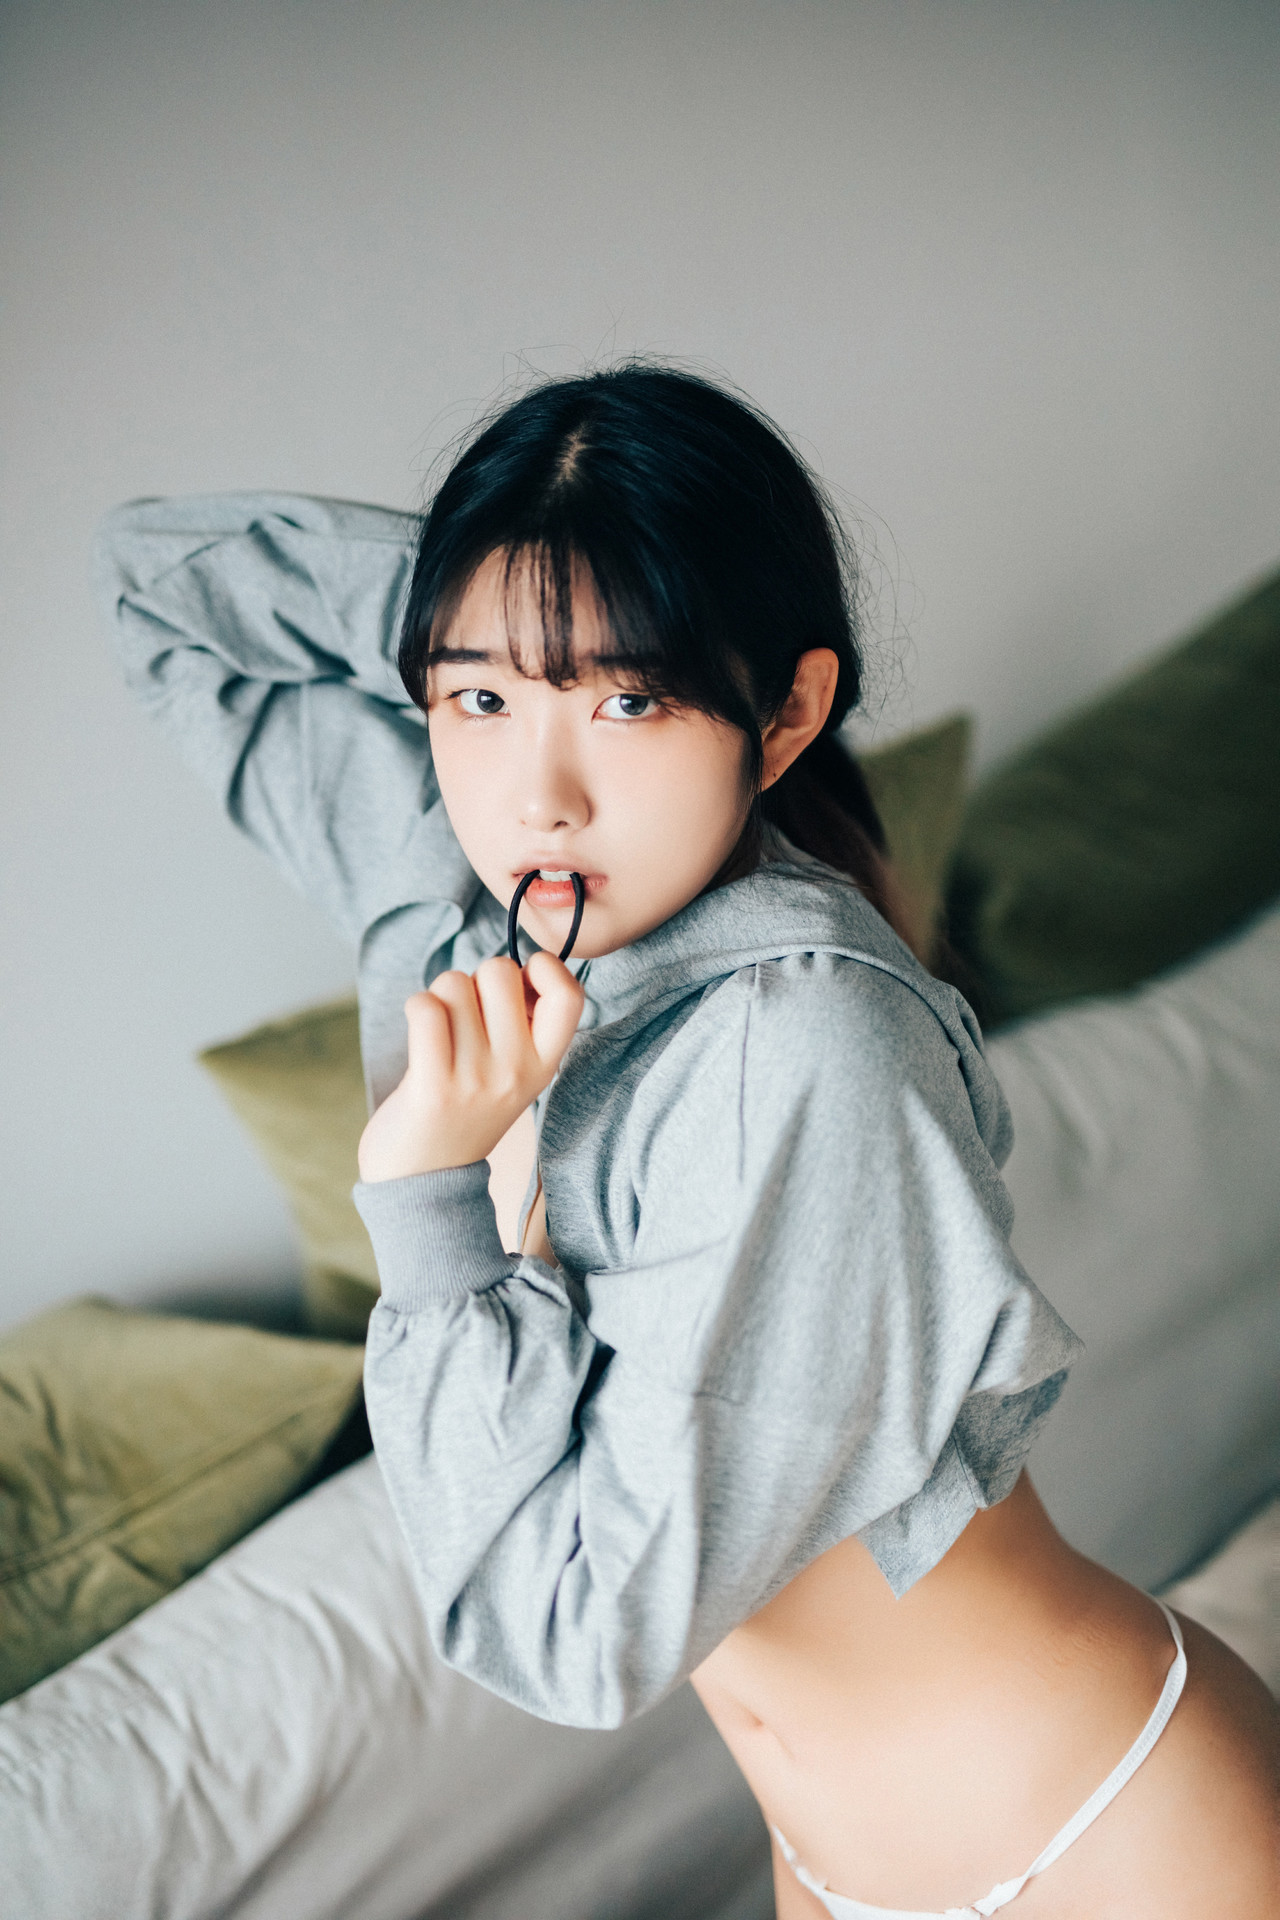 Sonson 손손, [Loozy] Date at home (+S Ver) Set.01(17)